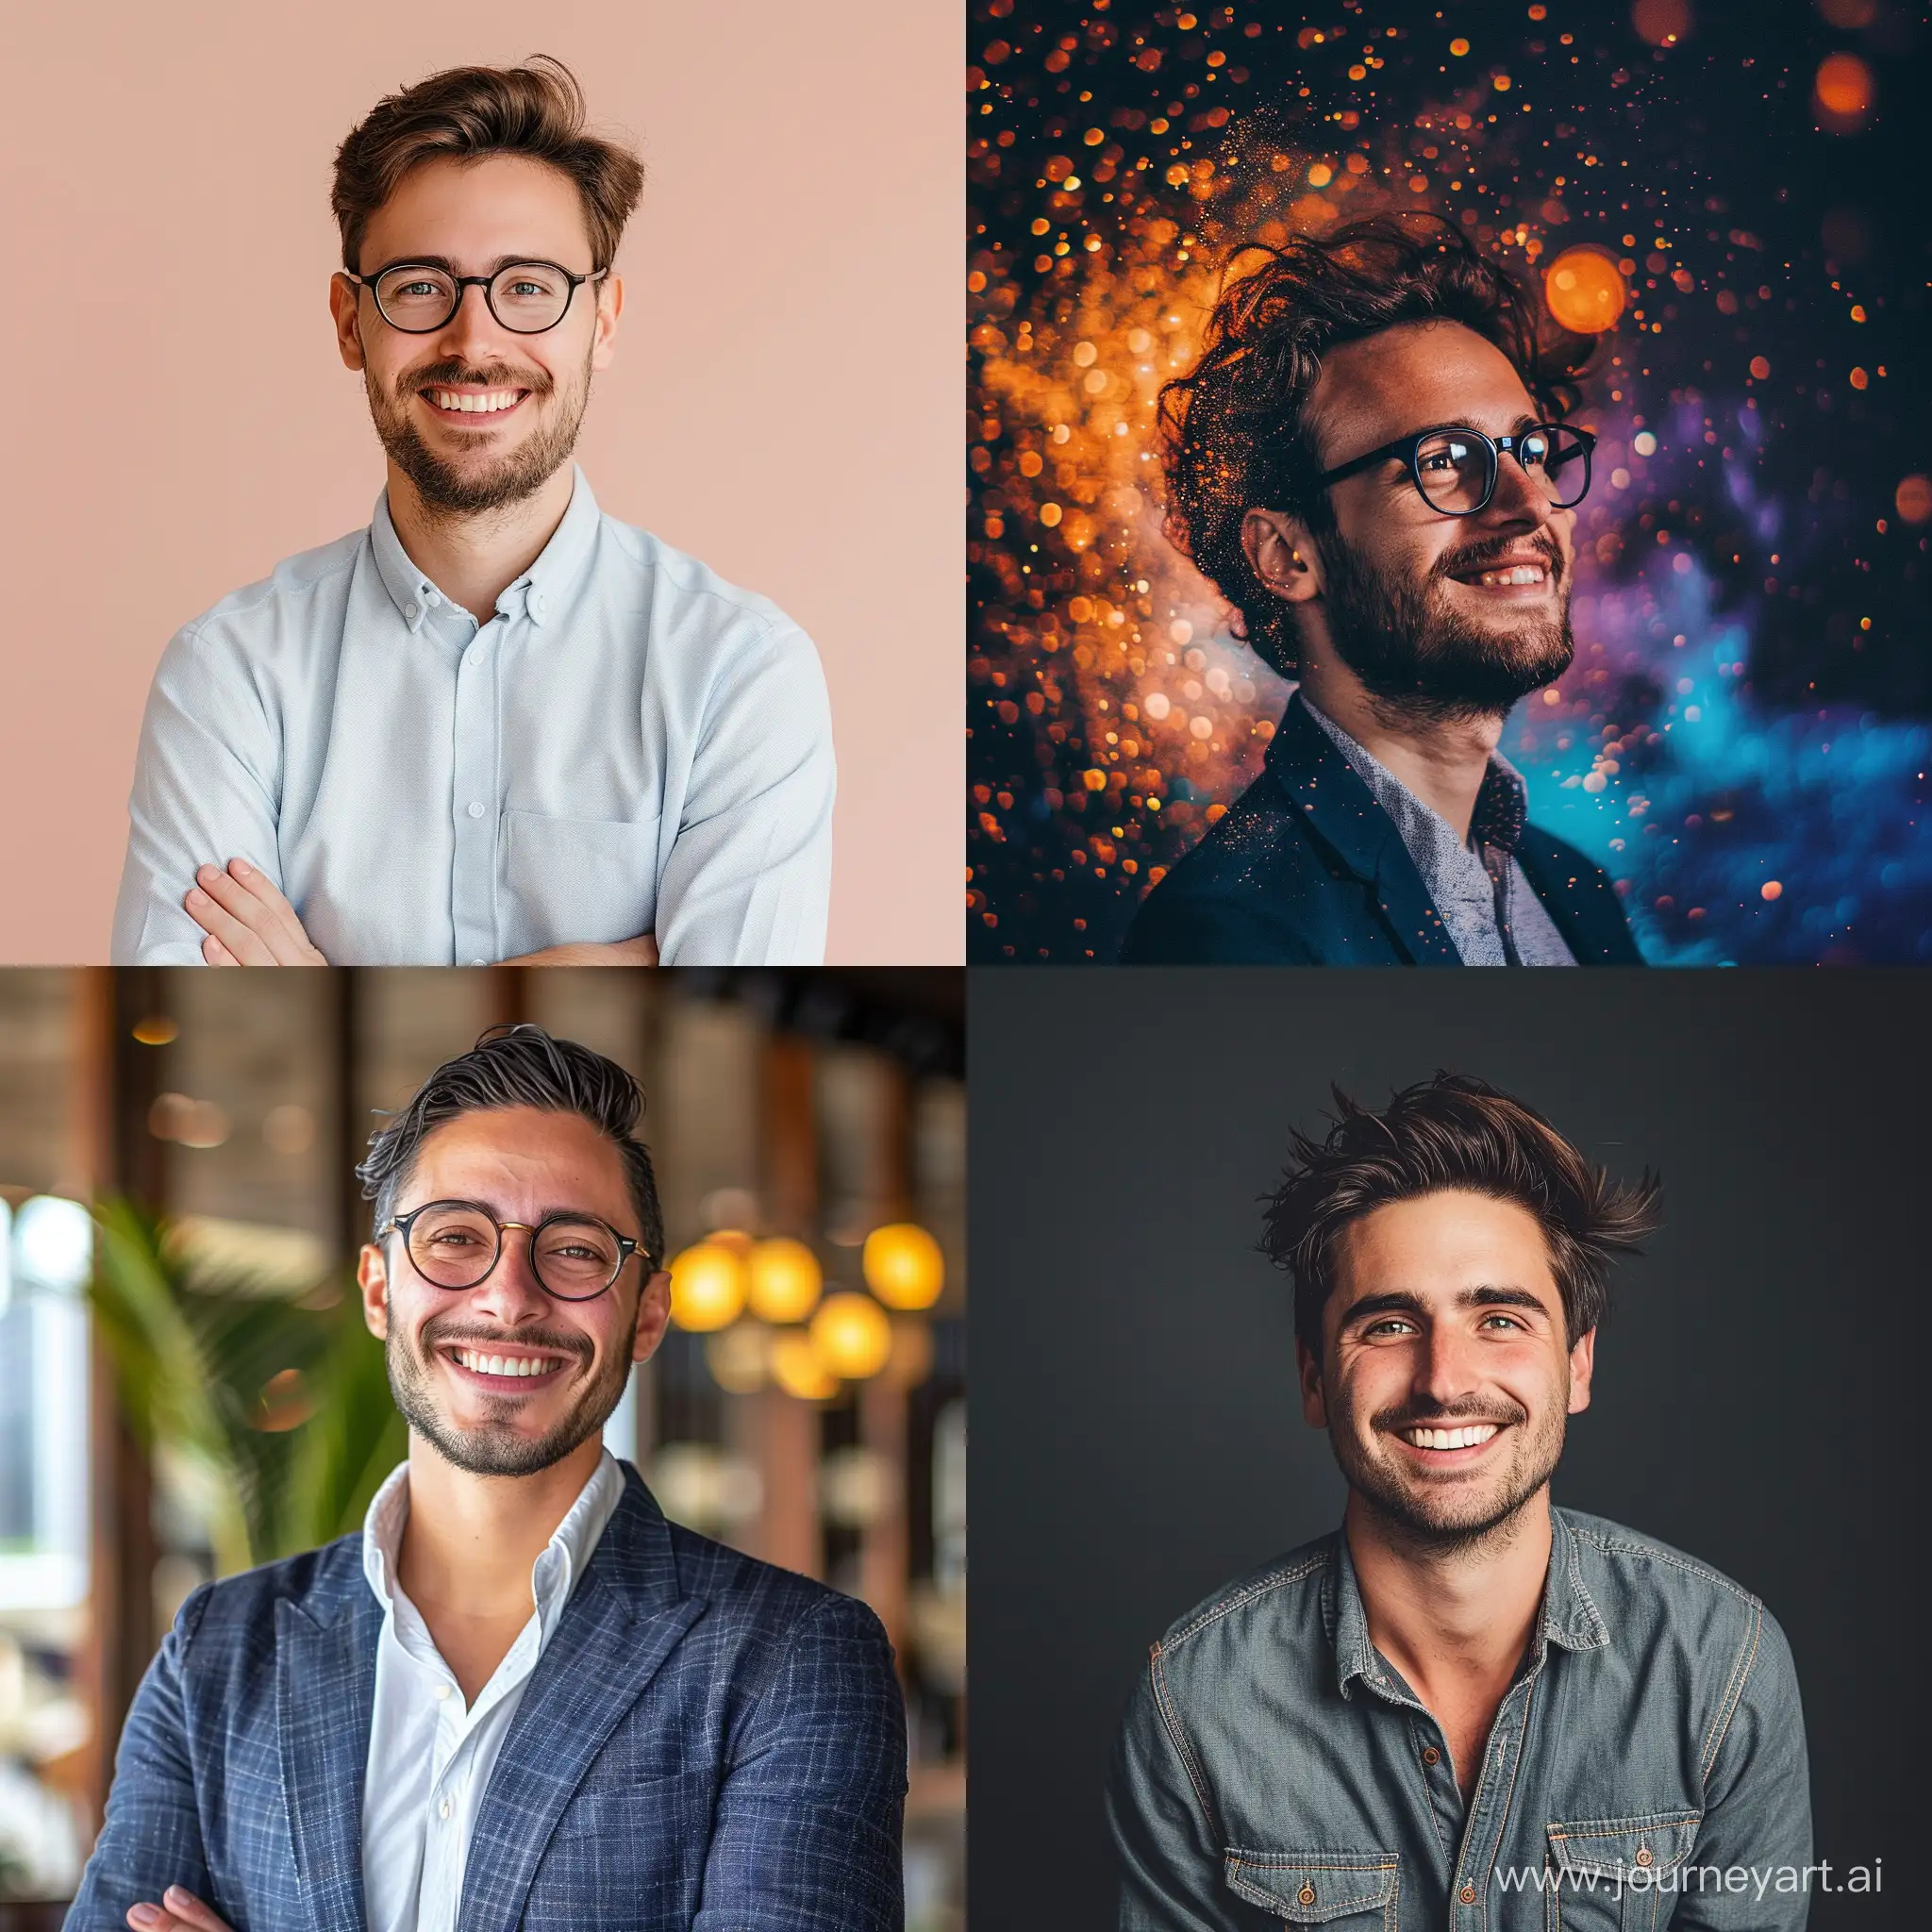 For a mid-twenties male professional with a background in management, here are some tips for an engaging Instagram avatar:  1. Use high-quality photos showcasing a friendly and professional demeanor. 2. Incorporate vibrant colors to make your avatar stand out. 3. Highlight your uniqueness and managerial expertise in the image. 4. Avoid overly intricate details that may not be discernible on small screens. 5. Experiment with filters to enhance the attractiveness of your avatar.